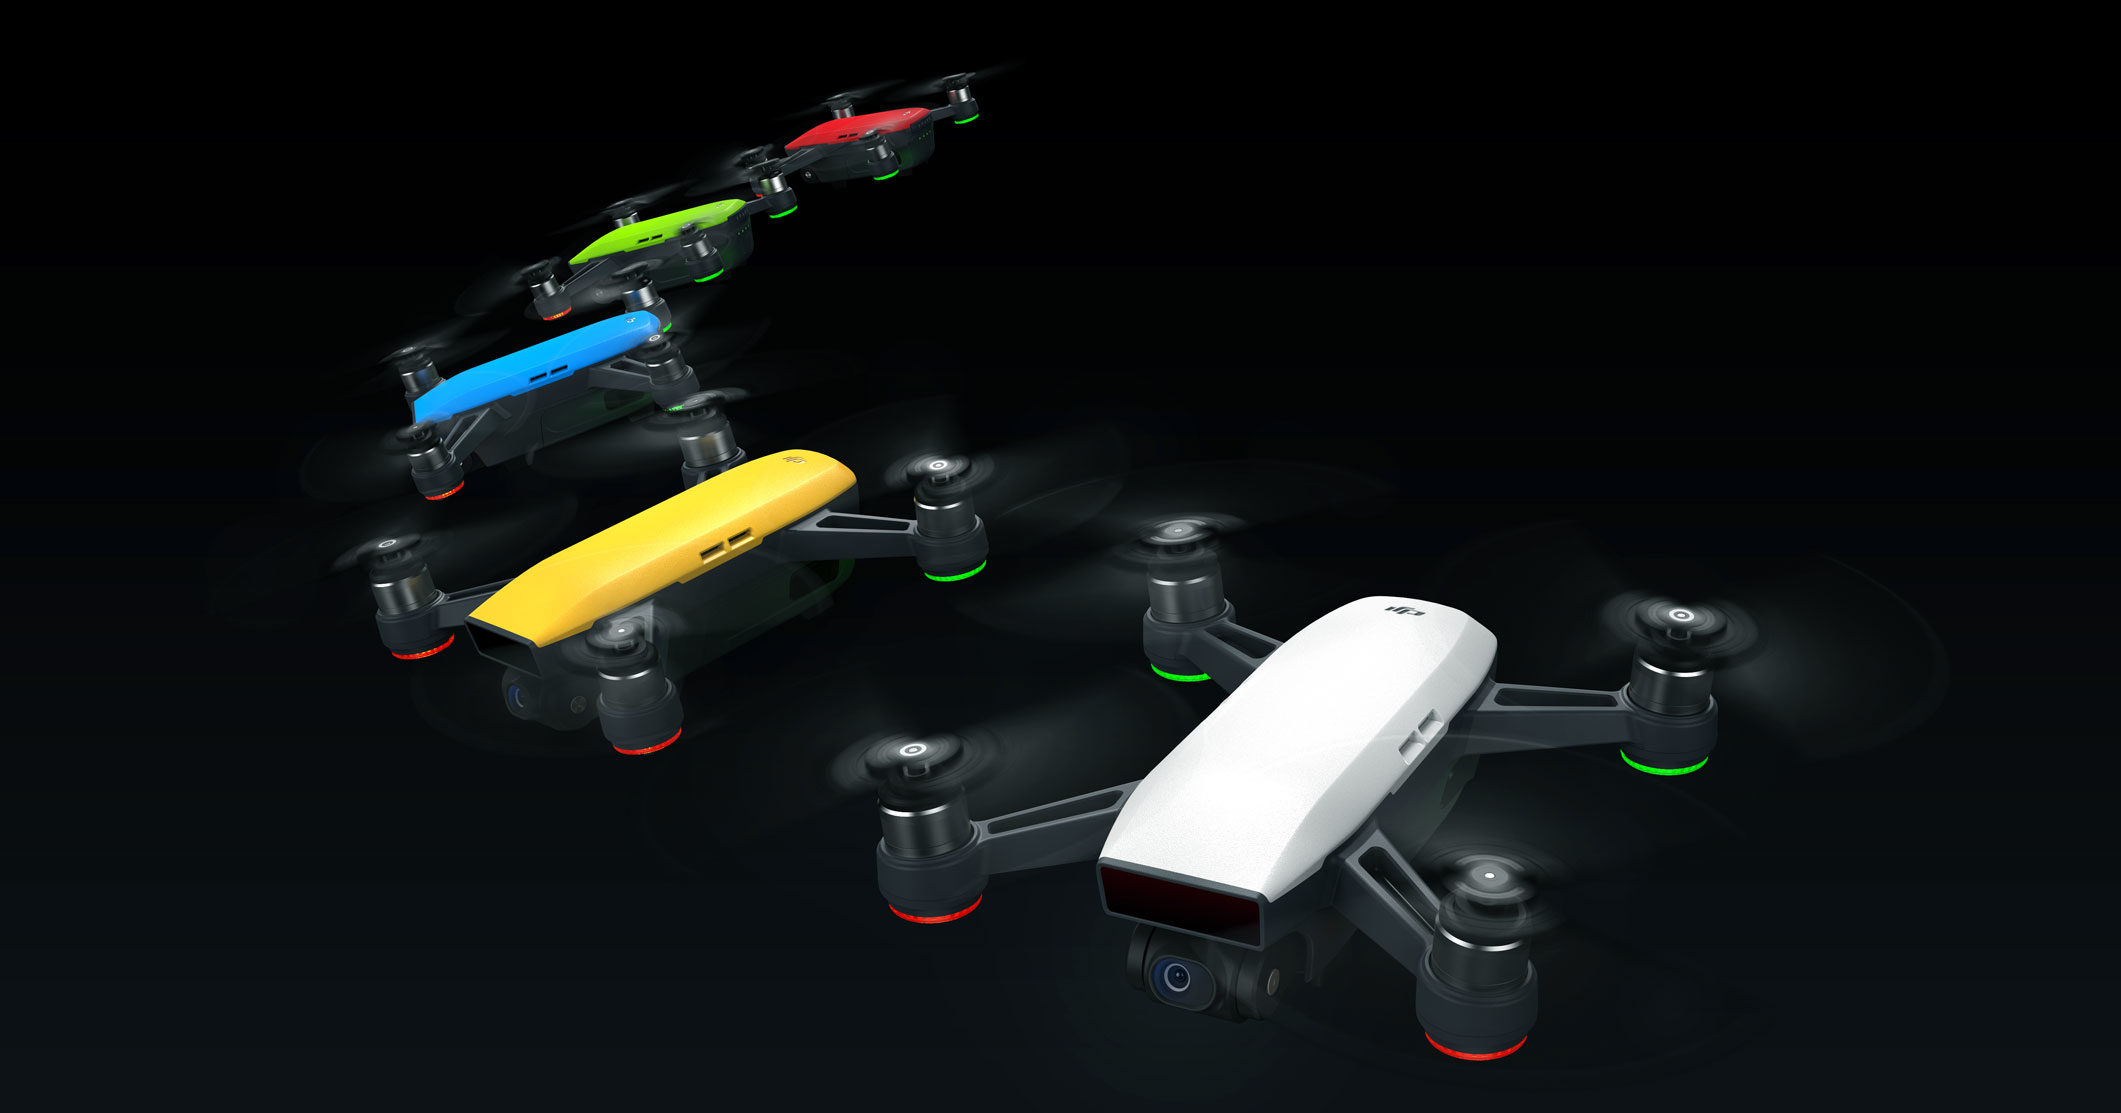 Free download DJI Spark Price Specs Release Date WIRED [2121x1113